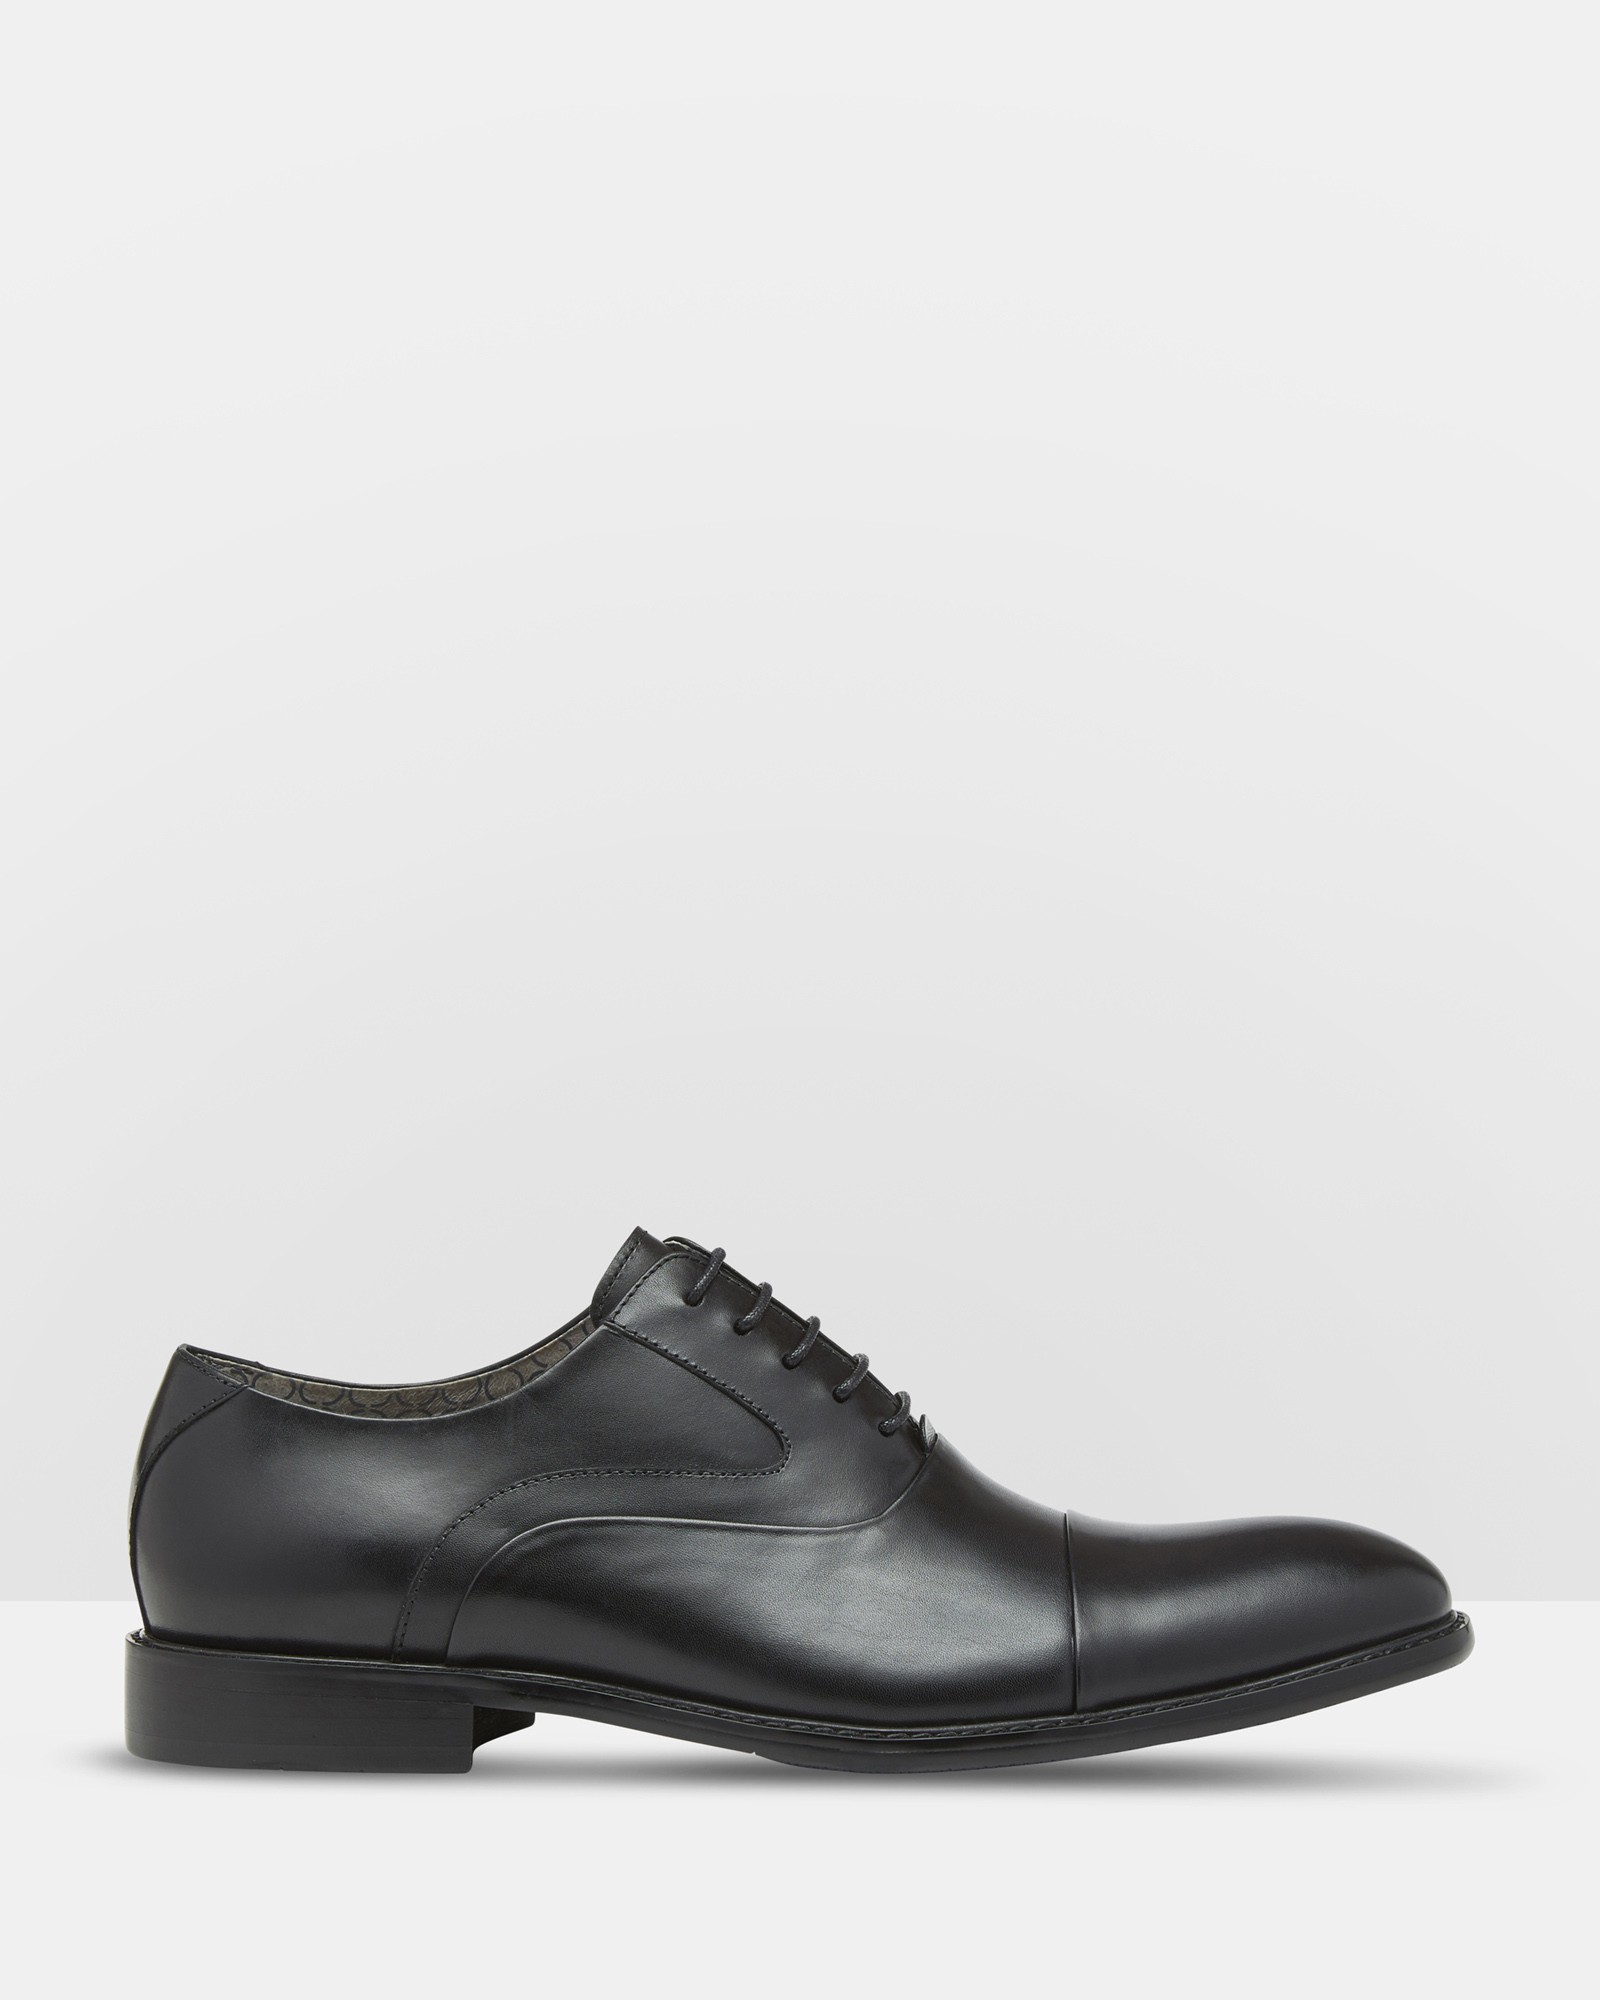 Frank Leather Oxford Shoes Black by Oxford | ShoeSales